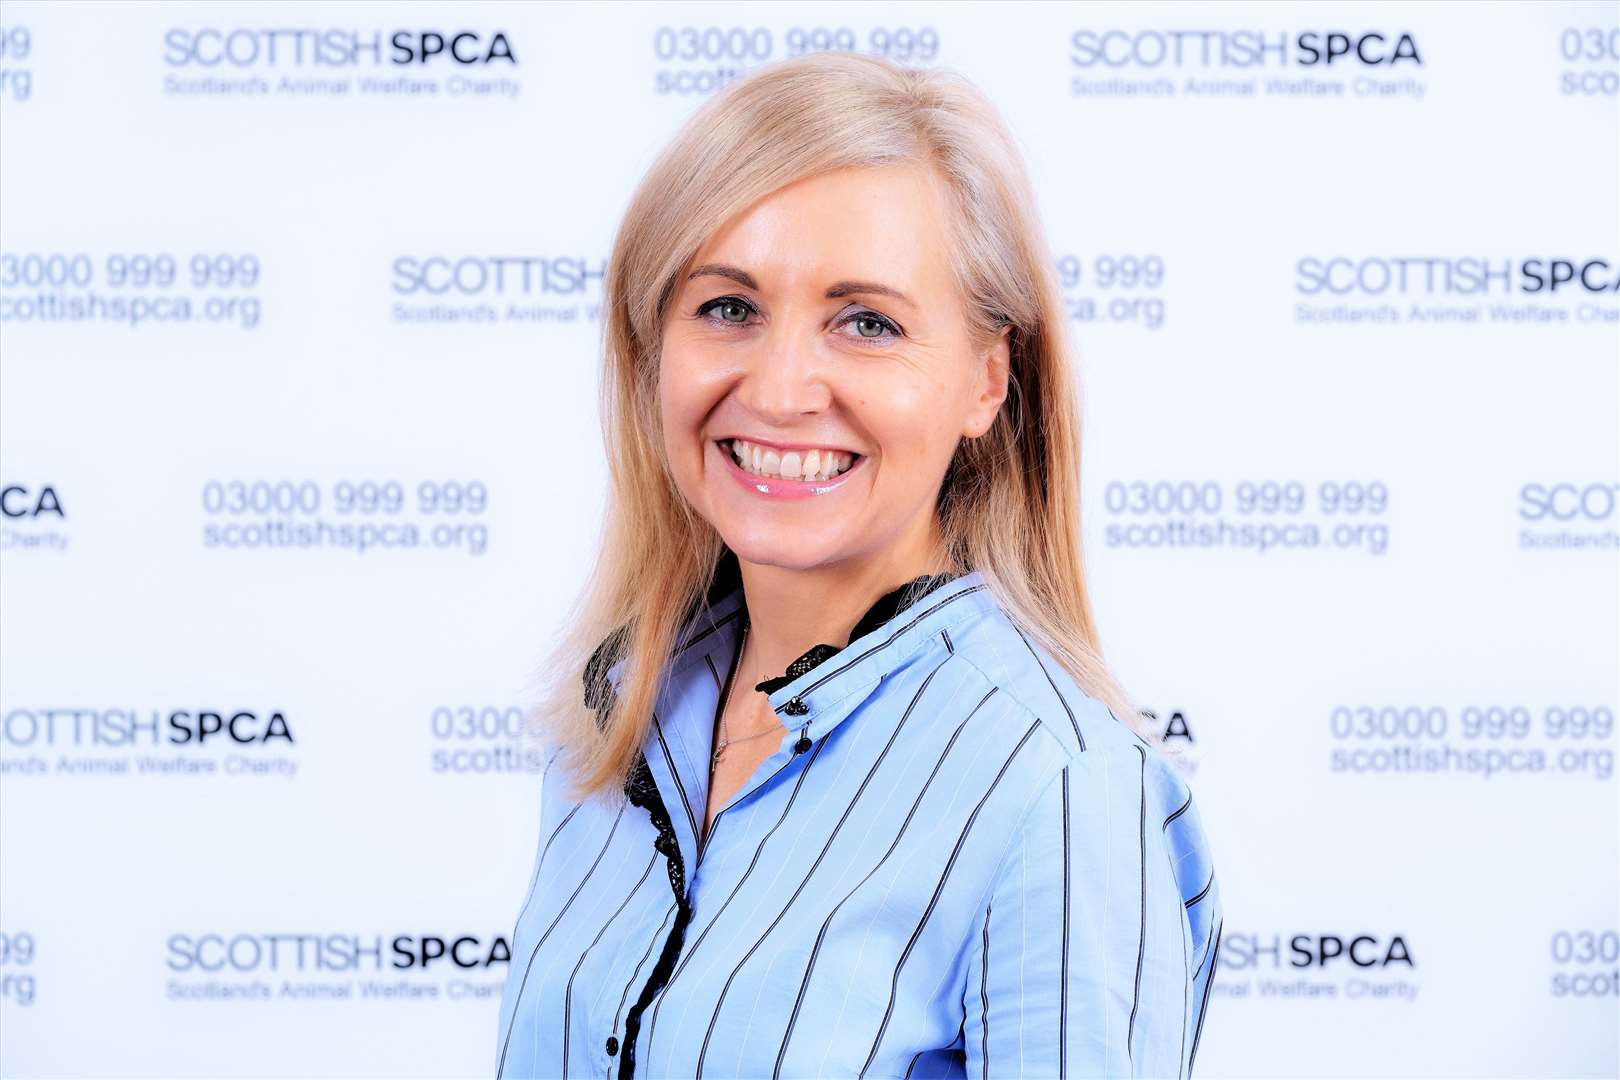 Kirsteen Campbell, chief executive, Scottish SPCA. Picture: Peter Devlin